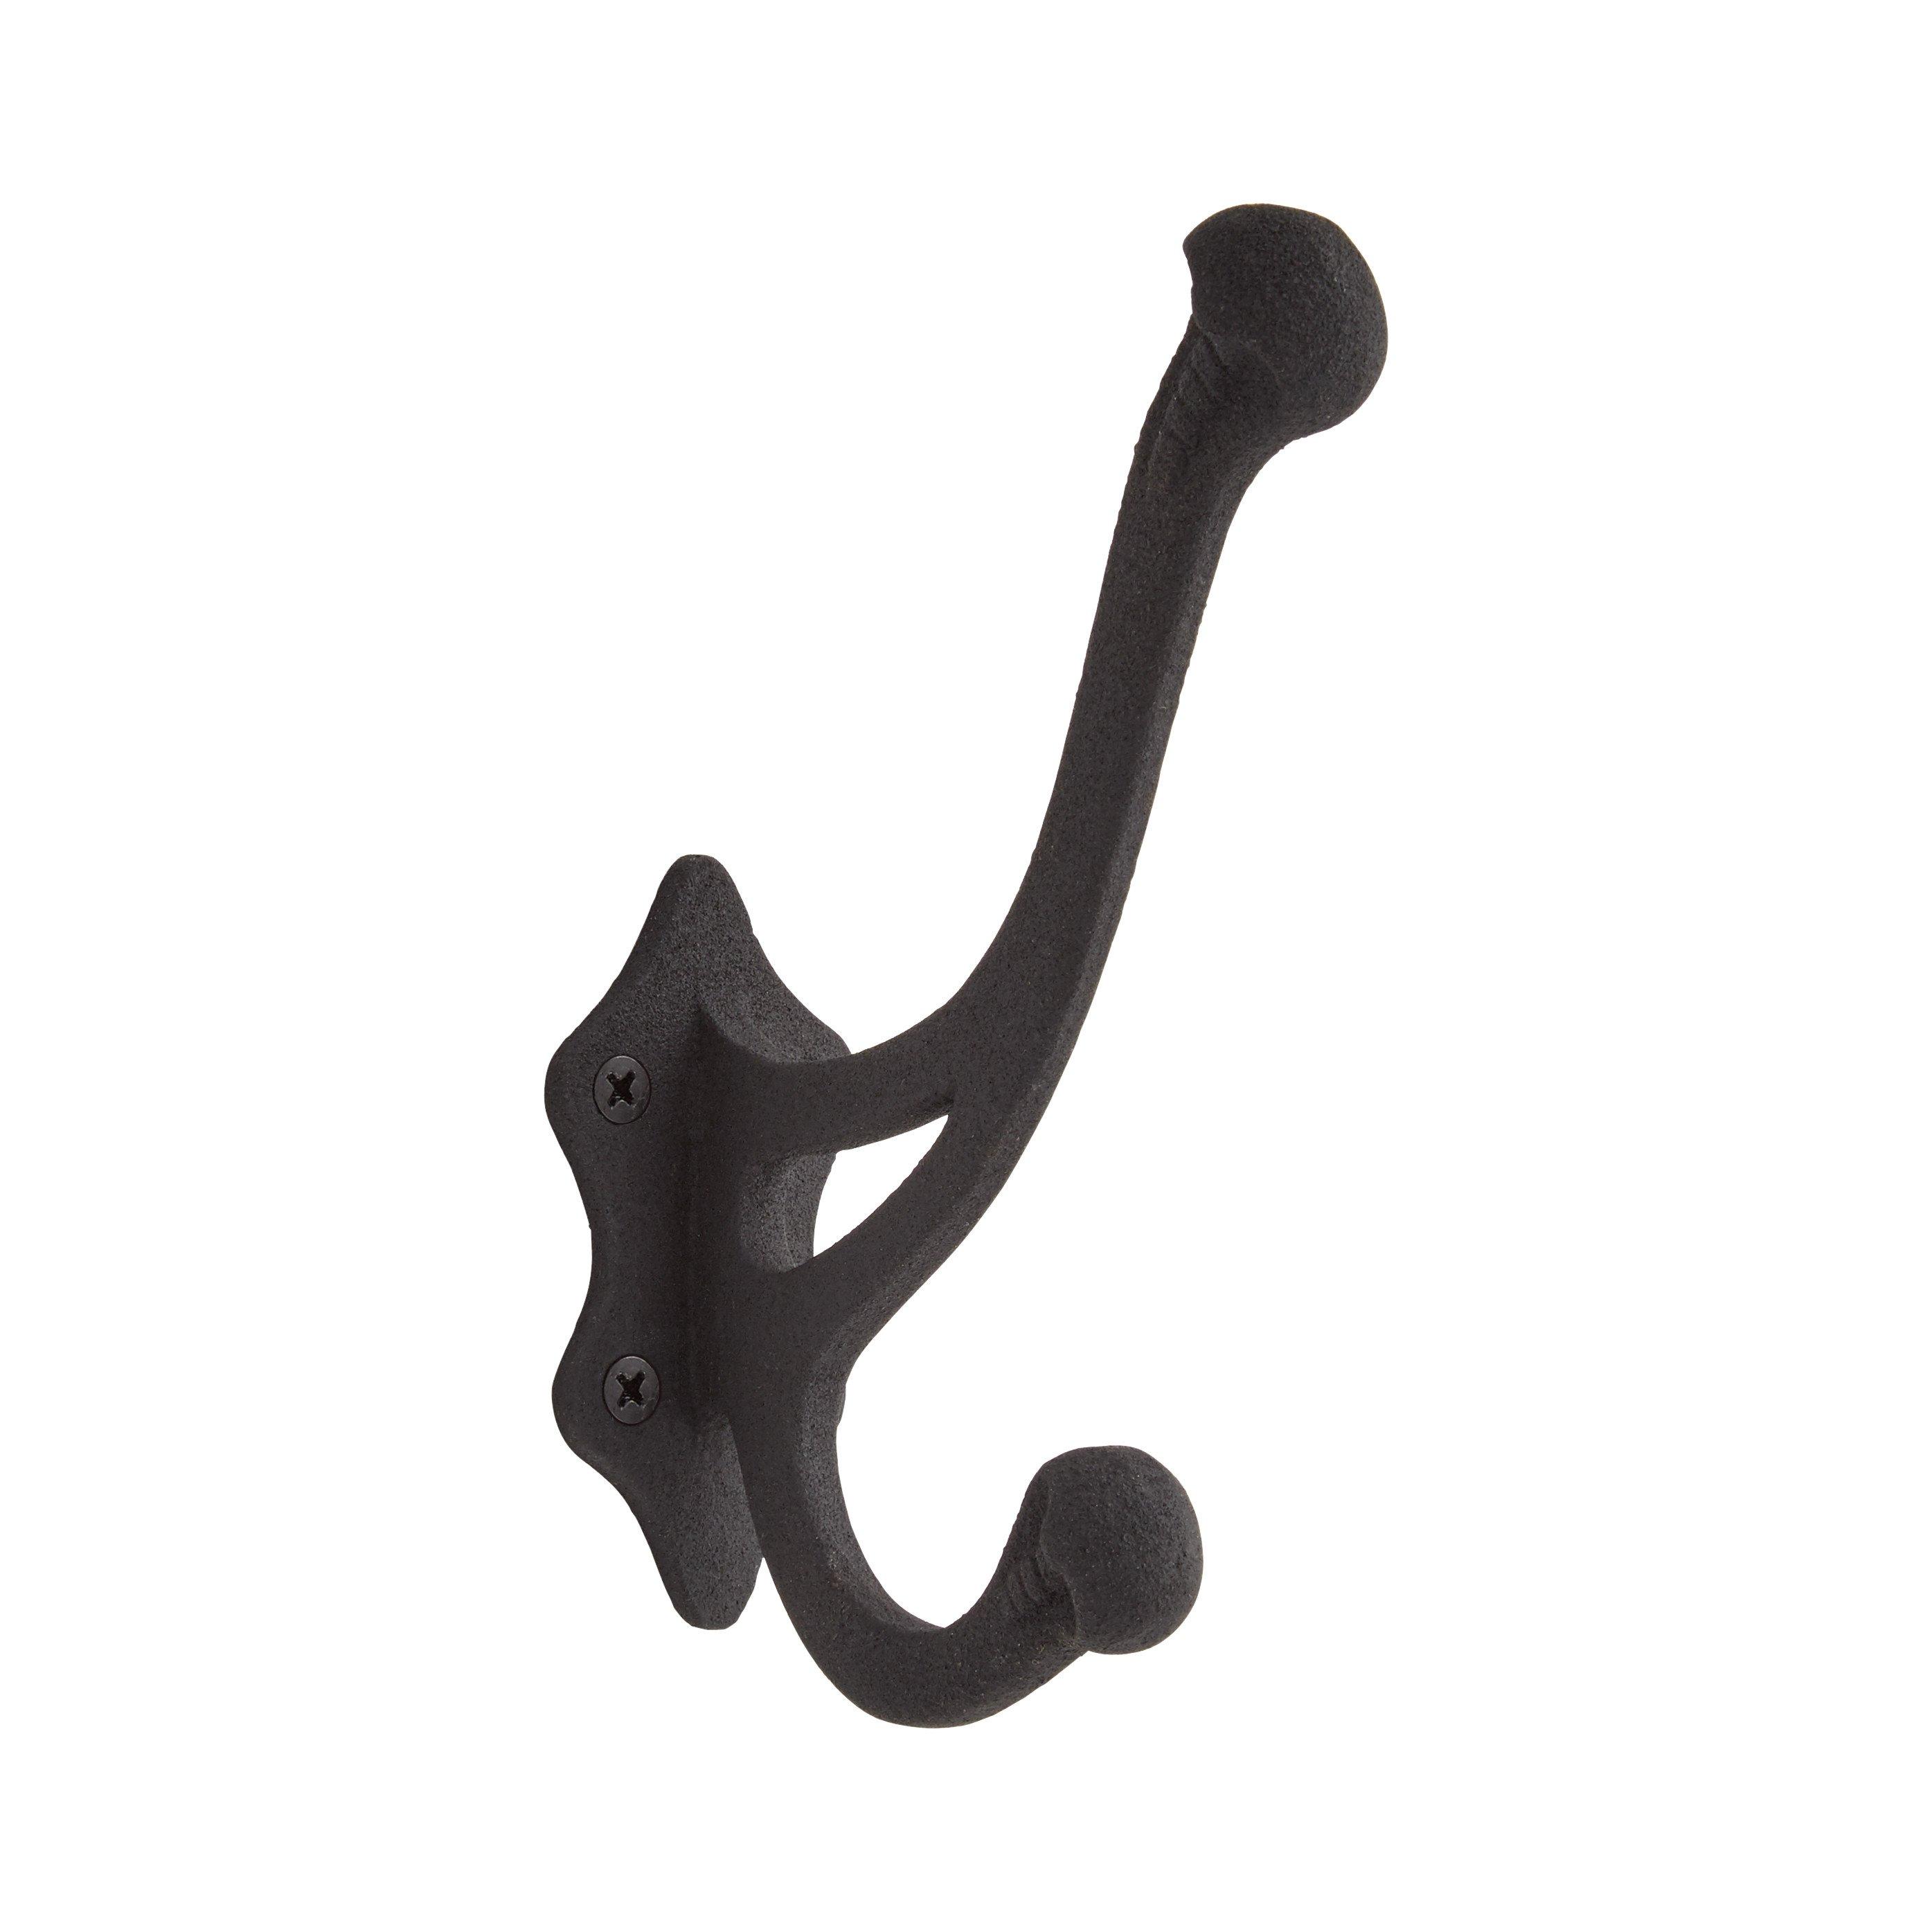 Signature Hardware 915867 1-5/8 inch Wide Double Coat and Hat Hook - Black